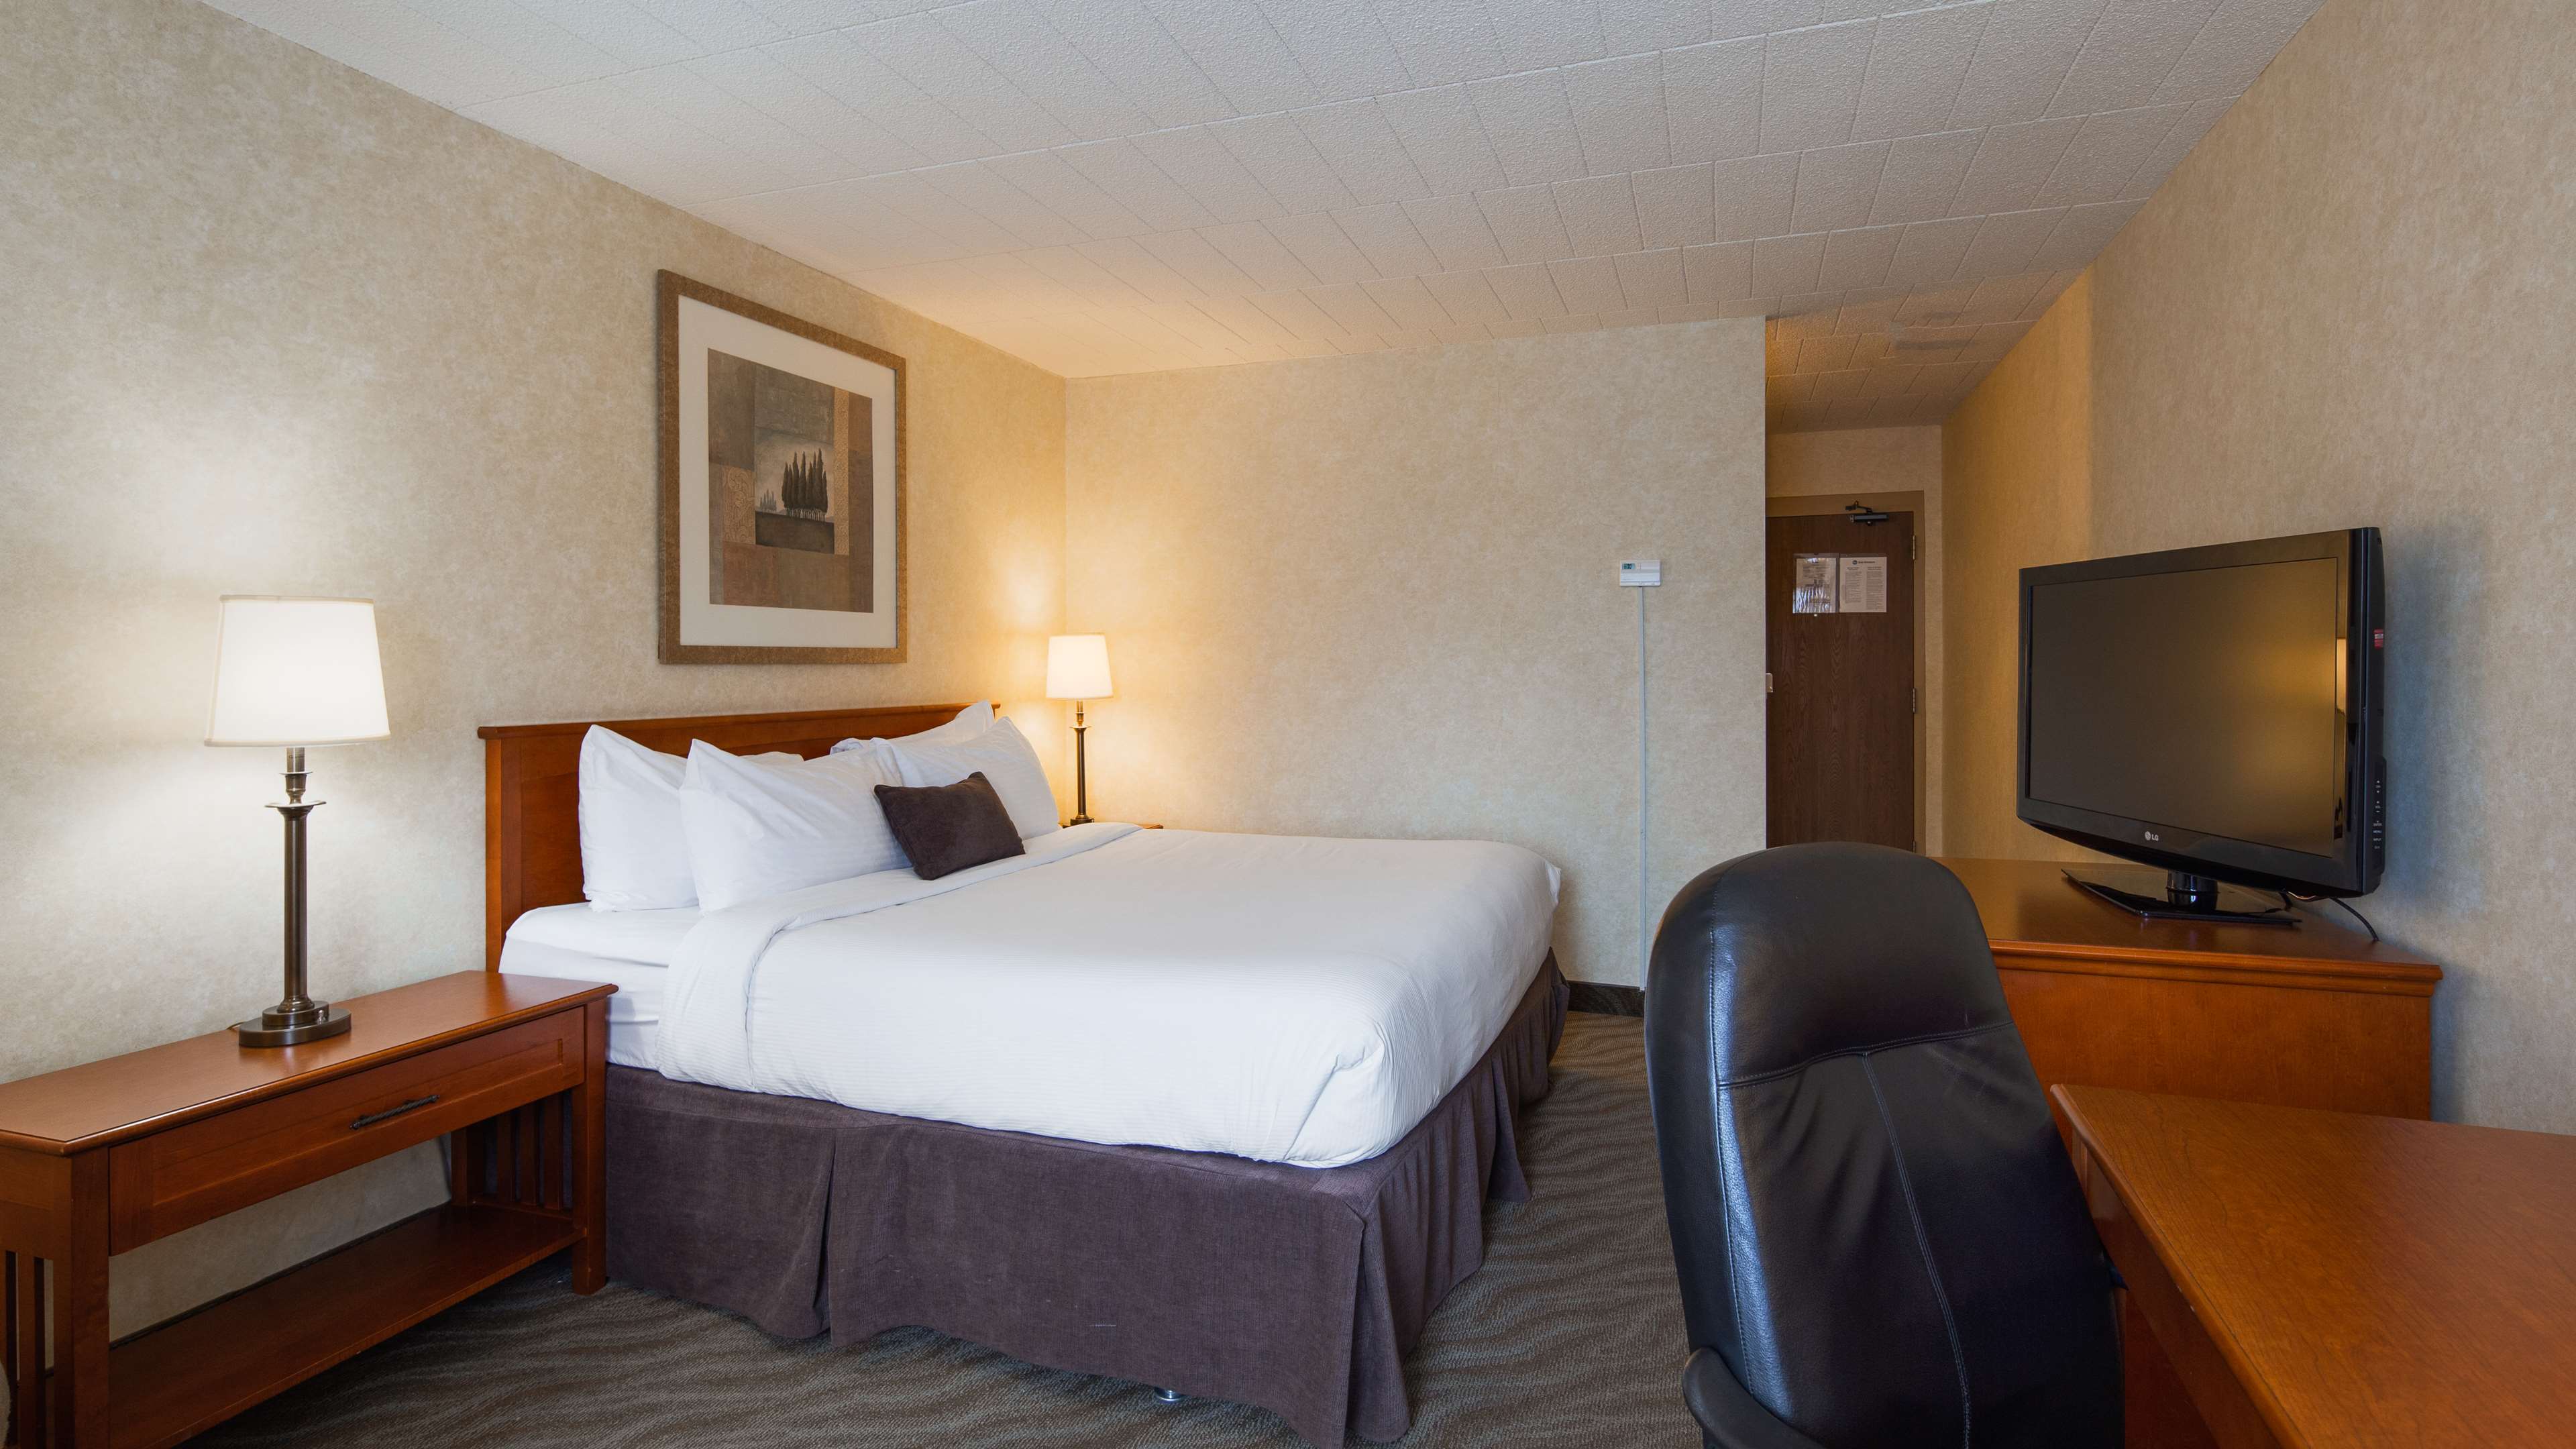 King Bed Guest Room Best Western North Bay Hotel & Conference Centre North Bay (705)474-5800